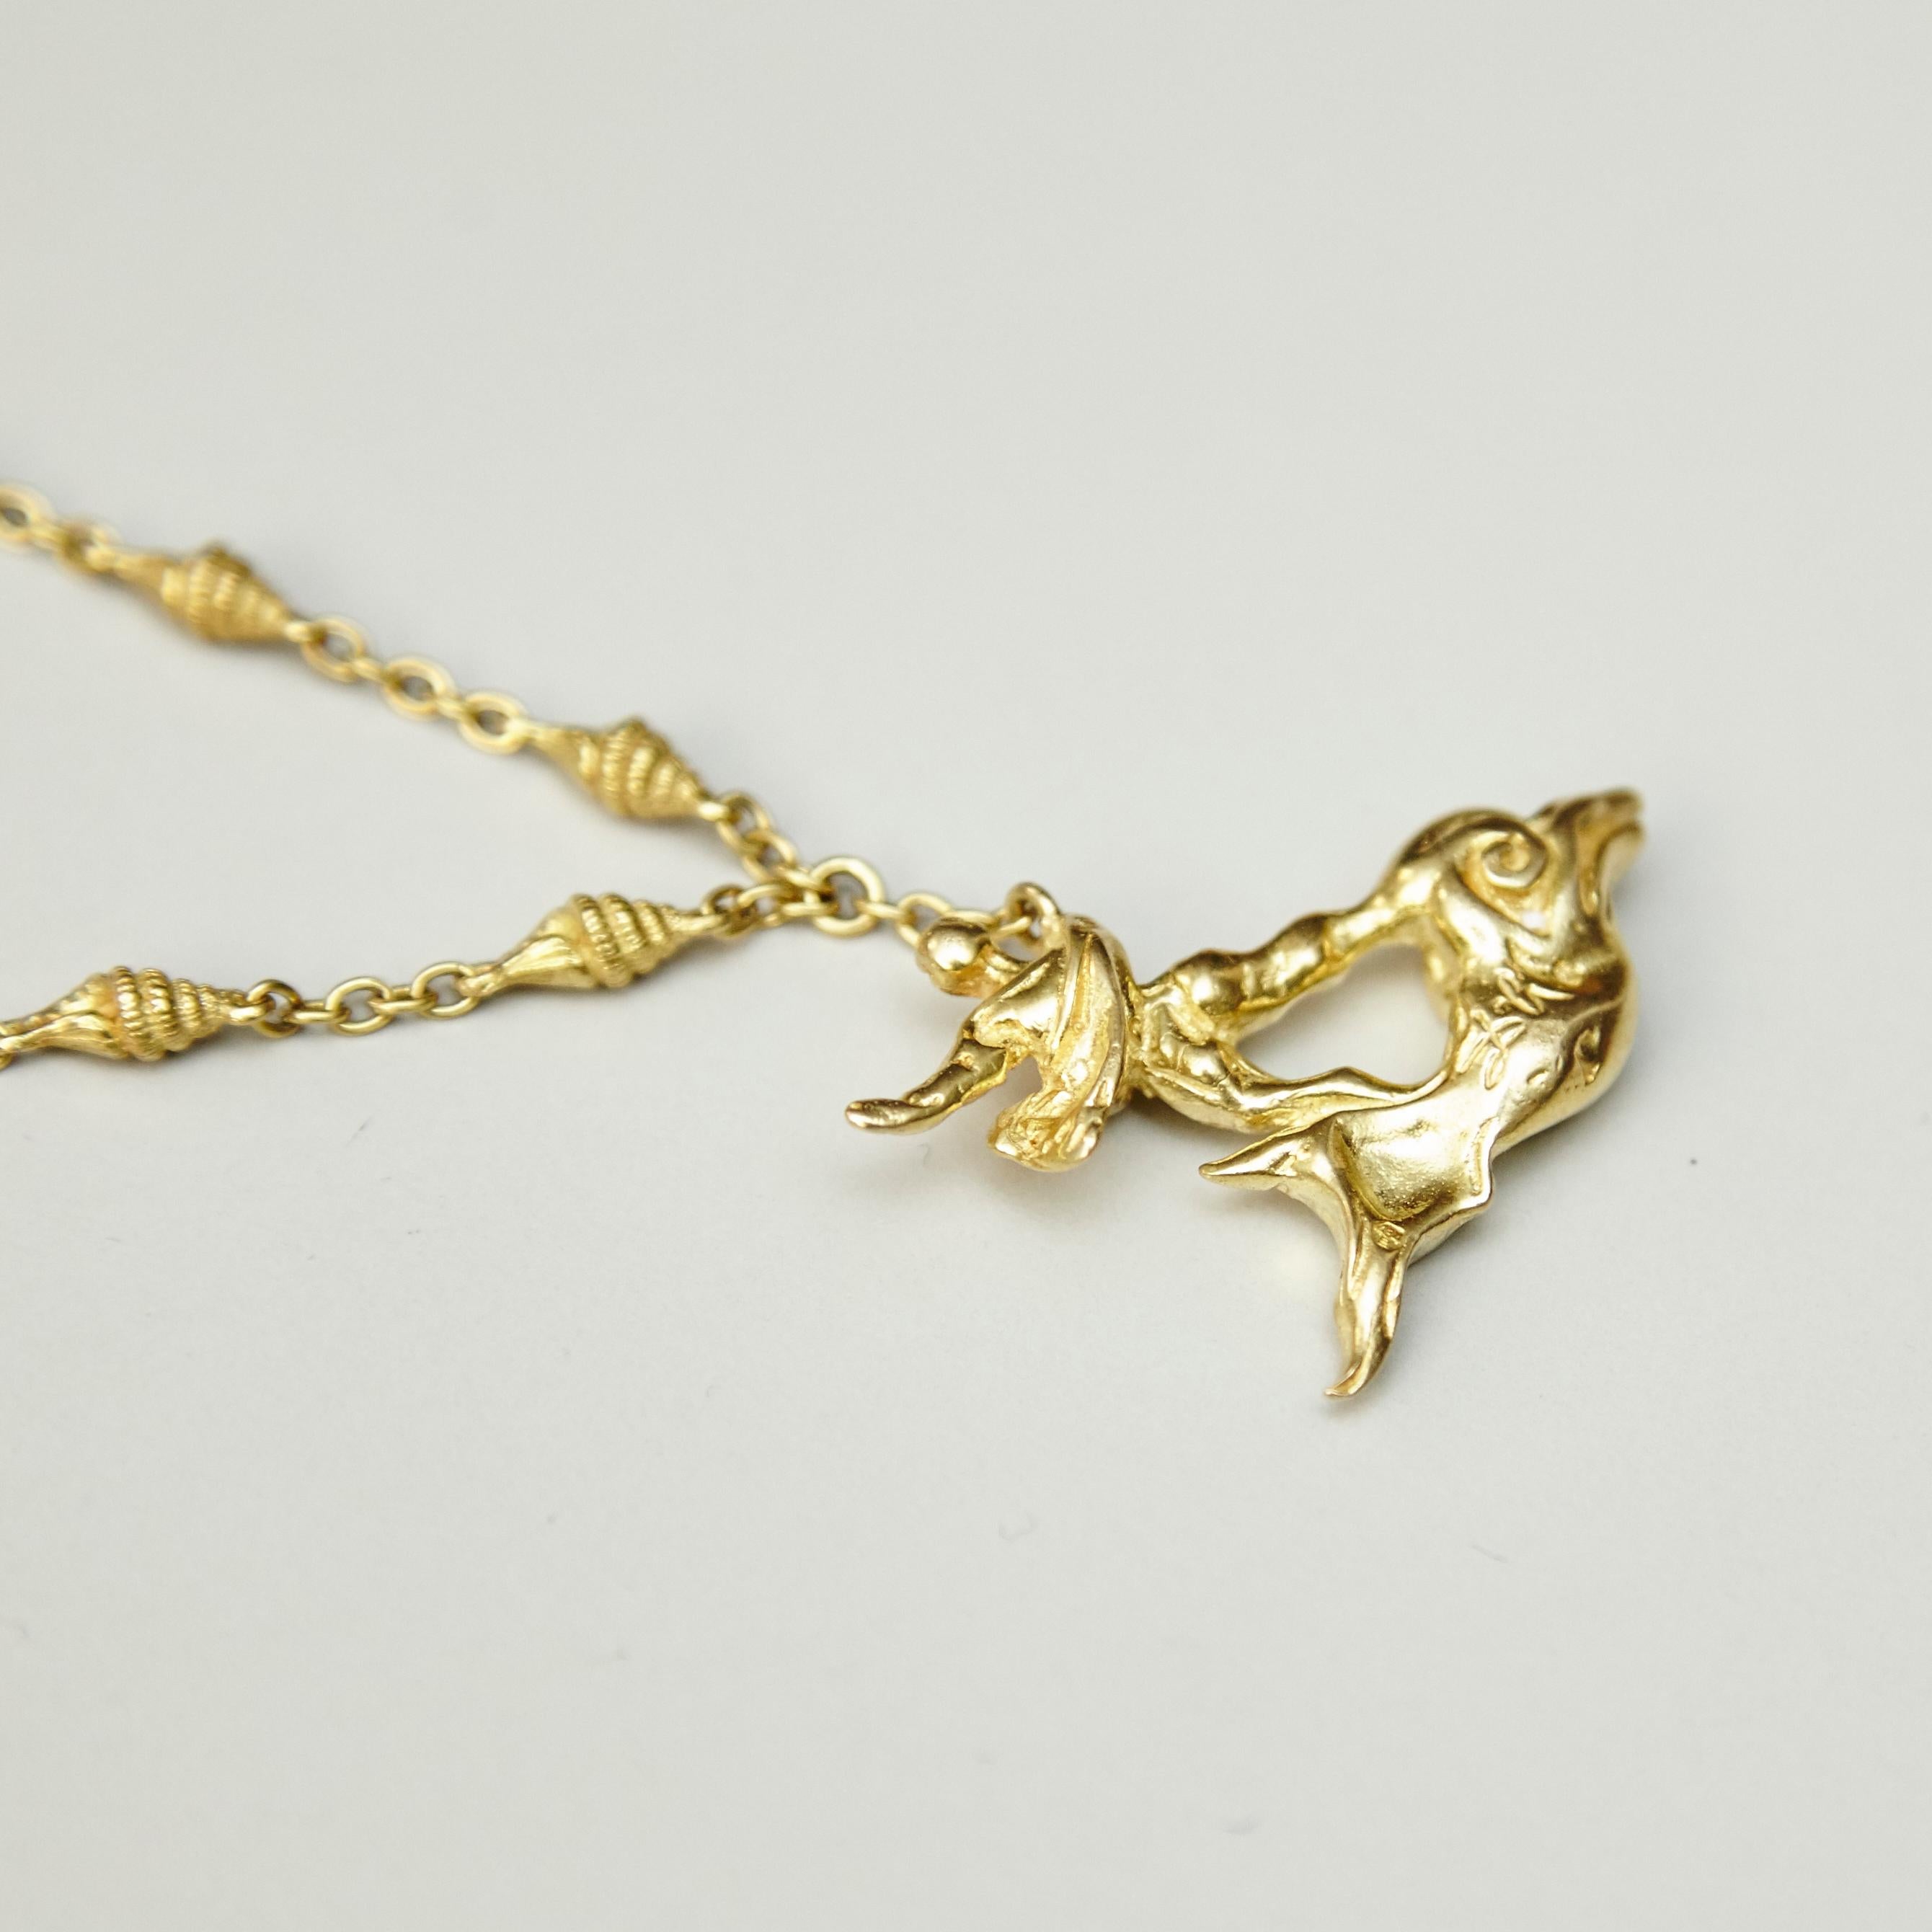 Limited Edition Dalí Gold Necklace and Bracelet 'The Man and the Dolphin' 4